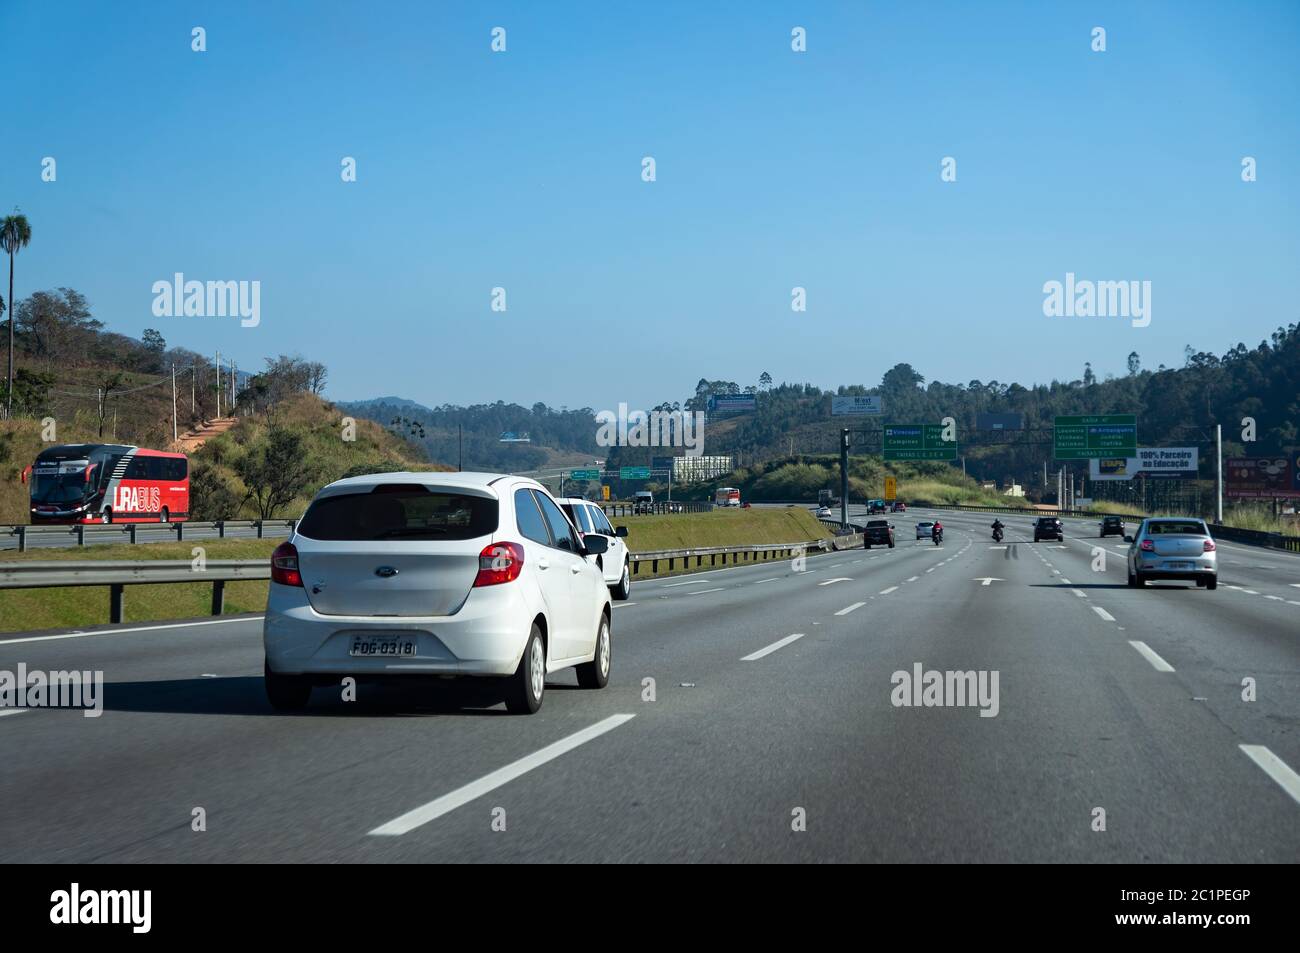 JUNDIAI, SAO PAULO / BRAZIL - AUGUST 19, 2018: View of KM 46 of Rodovia dos Bandeirantes highway (official designation SP-348) in early morning. Stock Photo